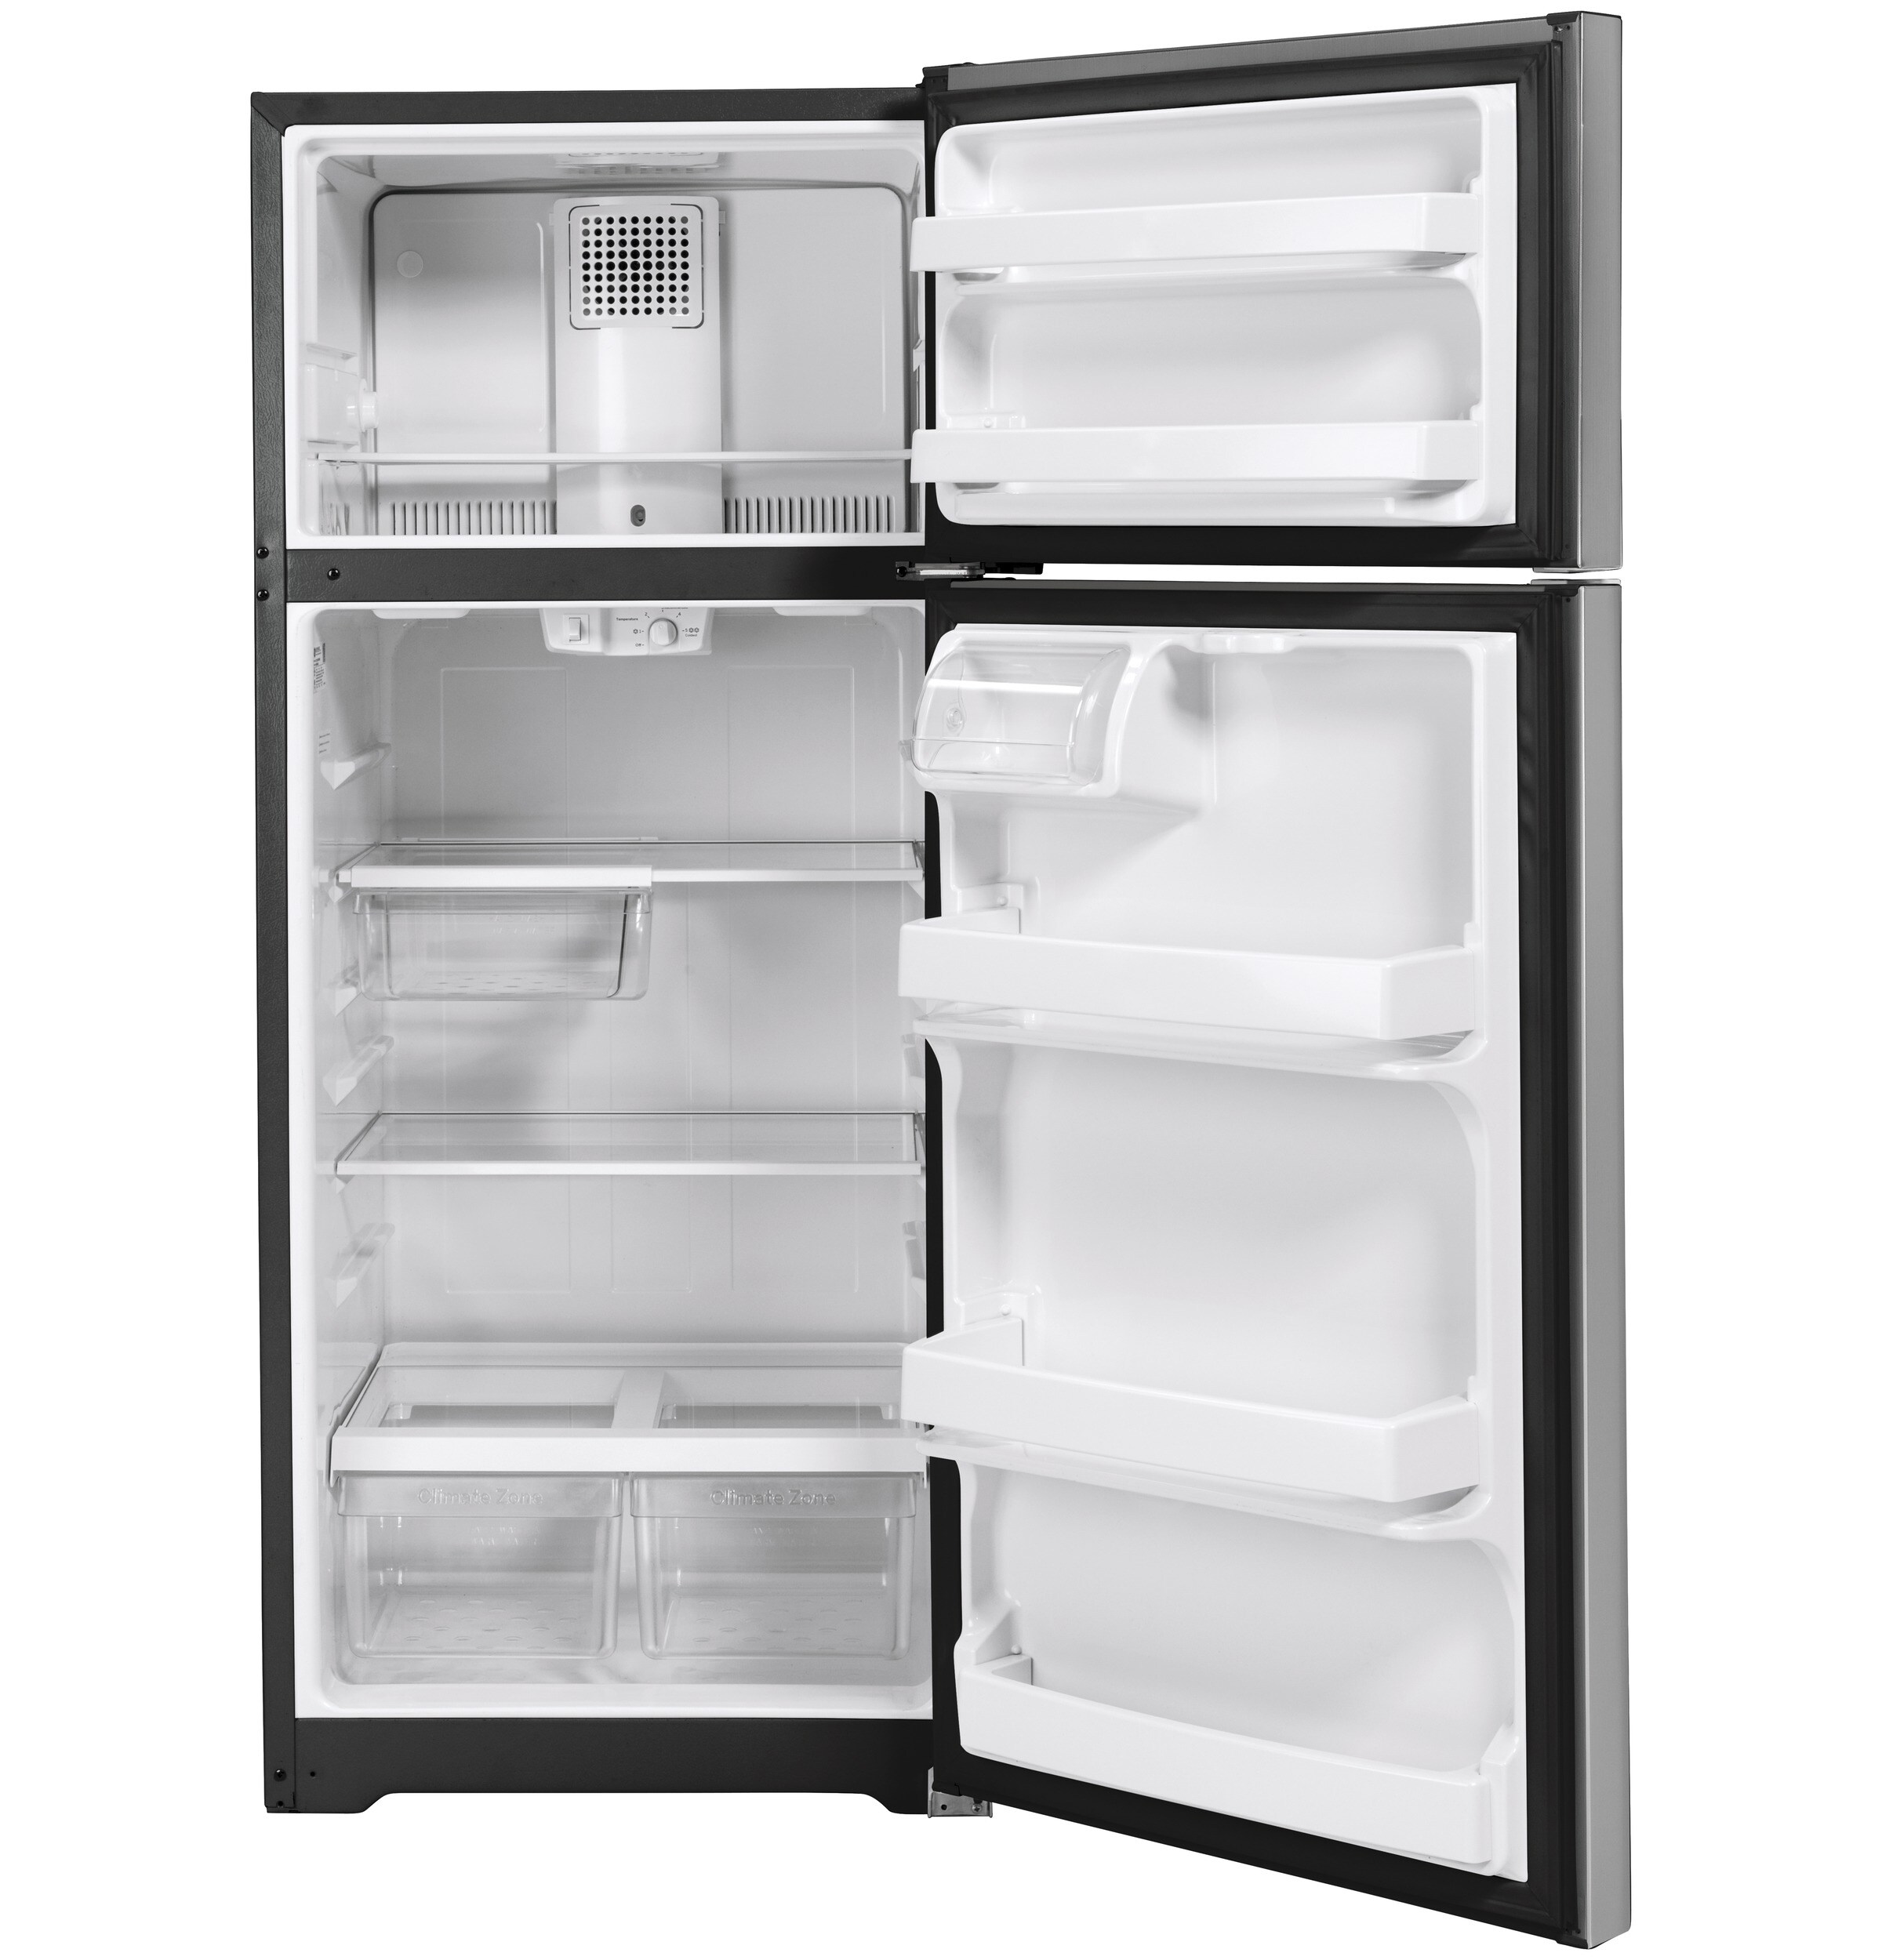 GE 17.5-cu ft Top-Freezer Refrigerator (Stainless Steel) in the Top ...